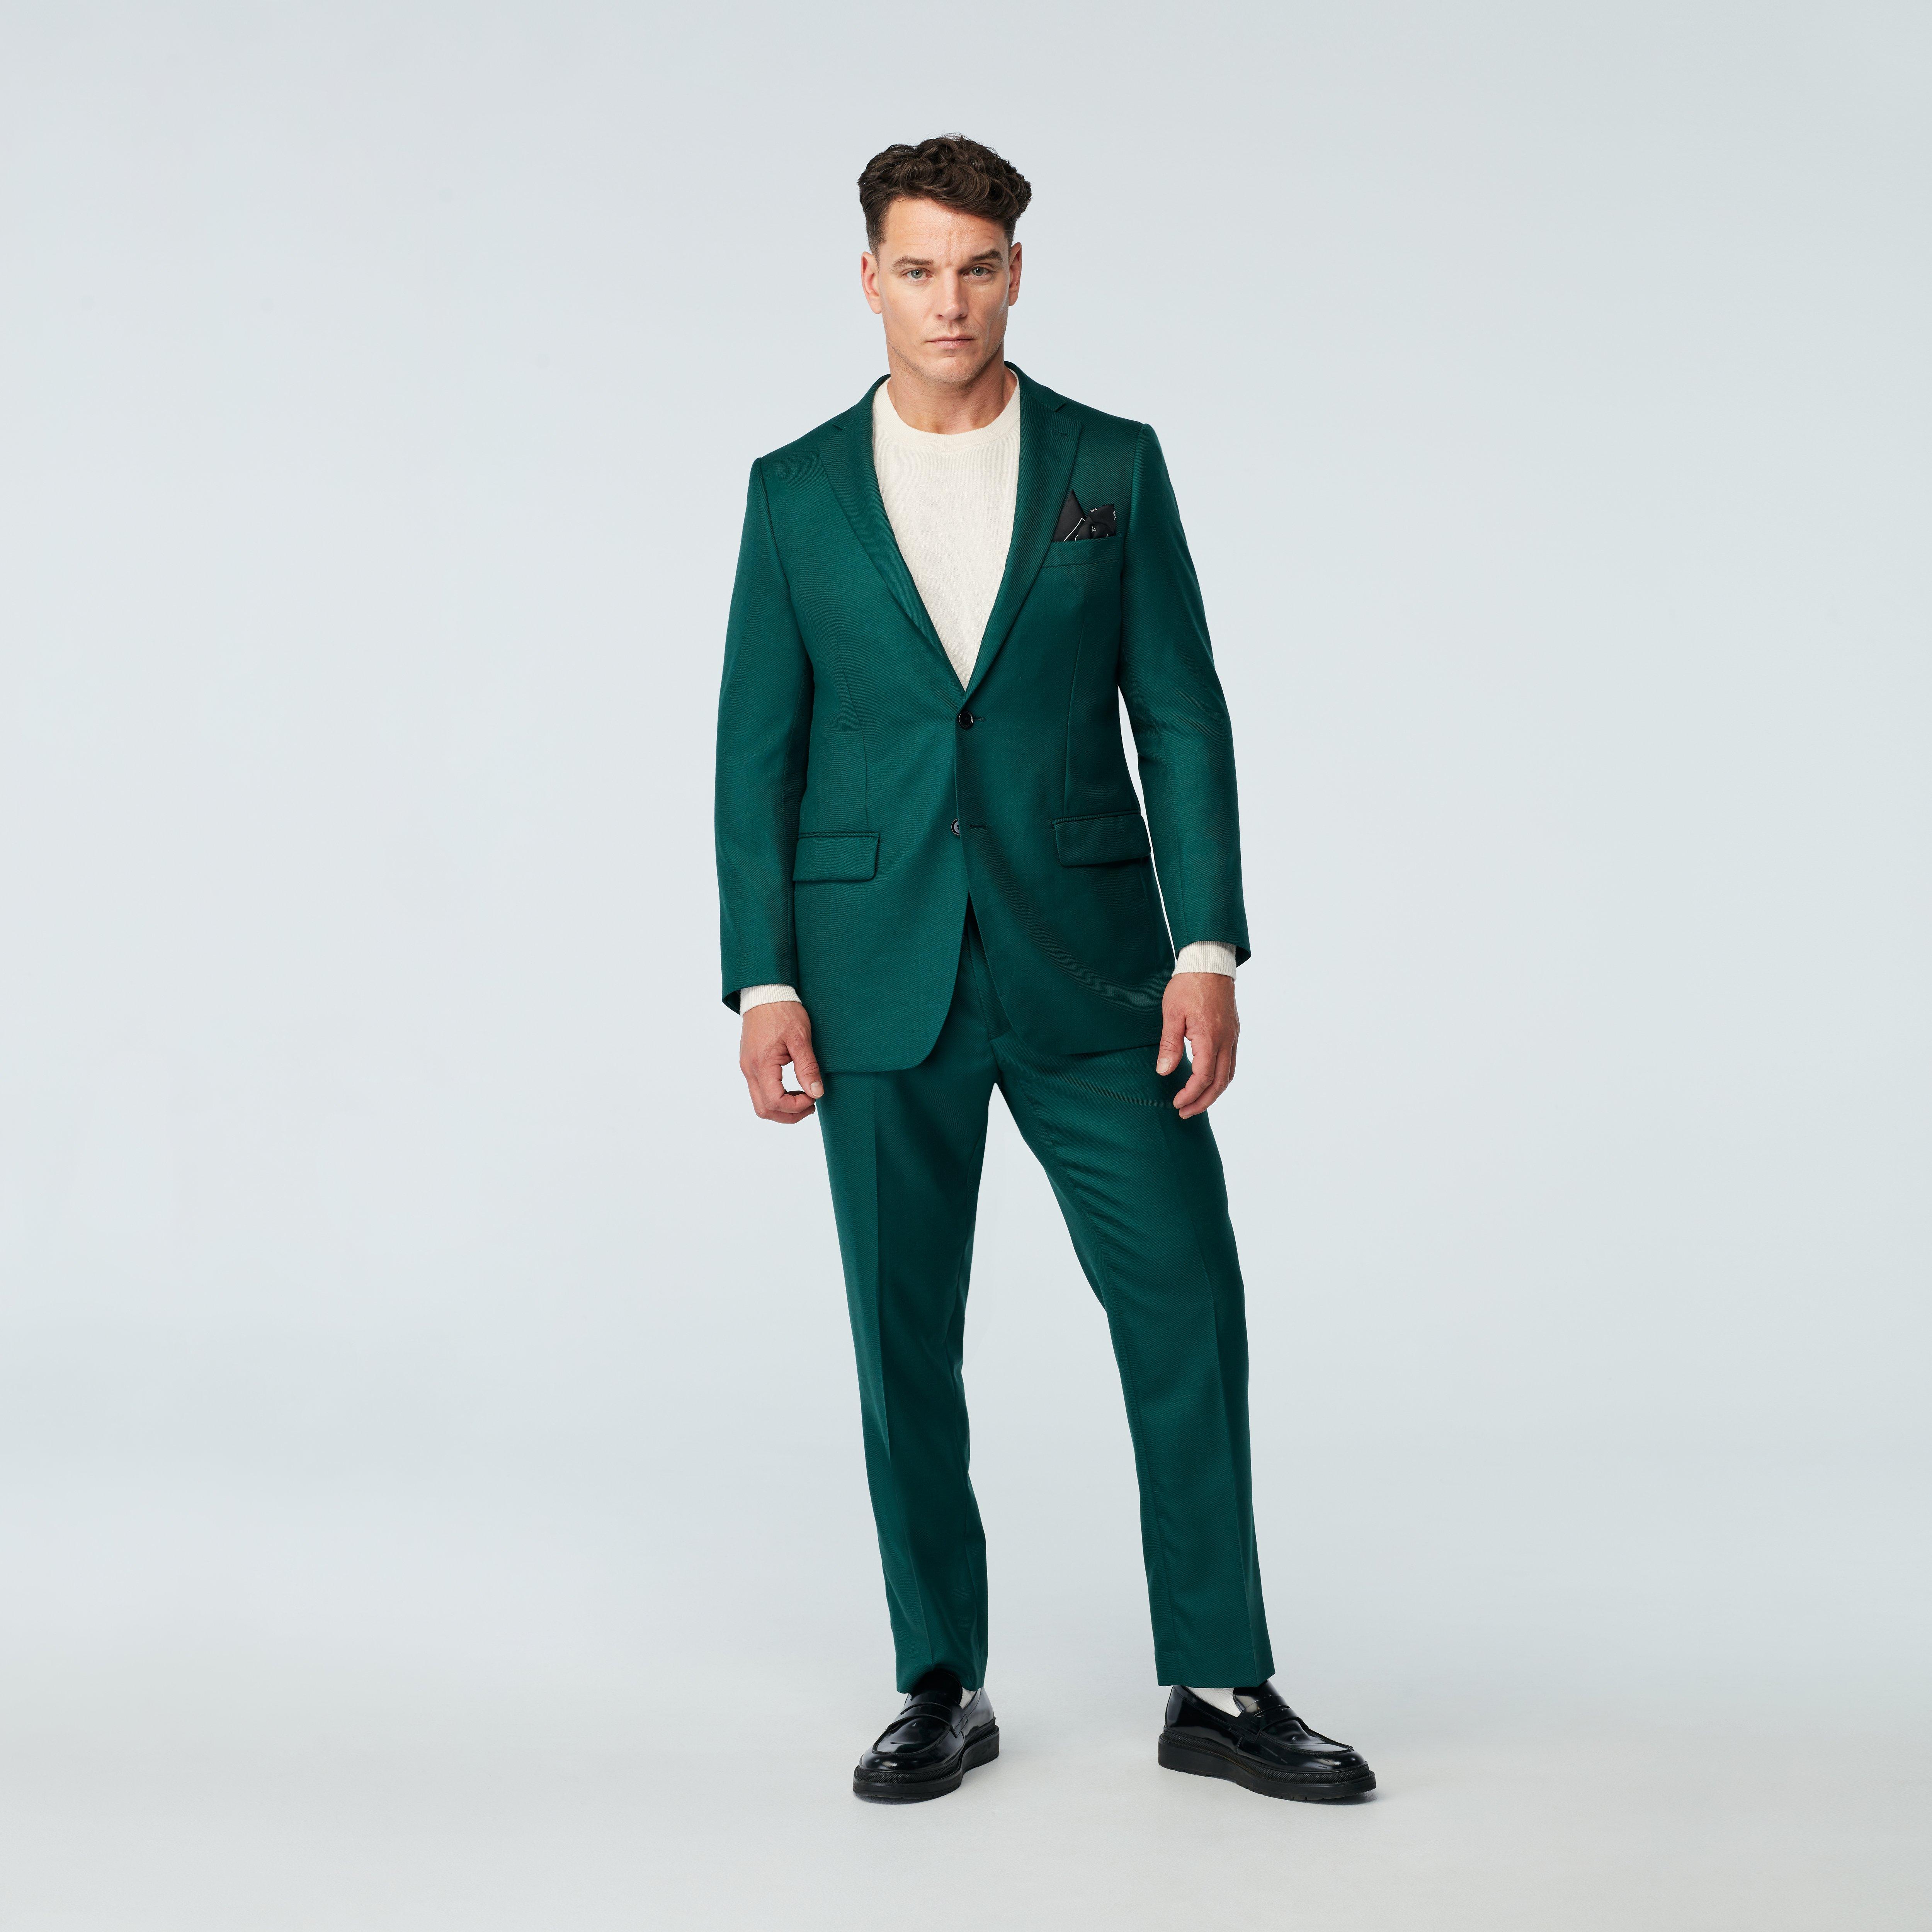 Vastraas New Stylish Partywear Formal Tuxedo Suits for Men in Bottle Green  Color Perfect of Every Event and Occasions. - Etsy | Tuxedo suit, Green  suit men, Tuxedo suit for men